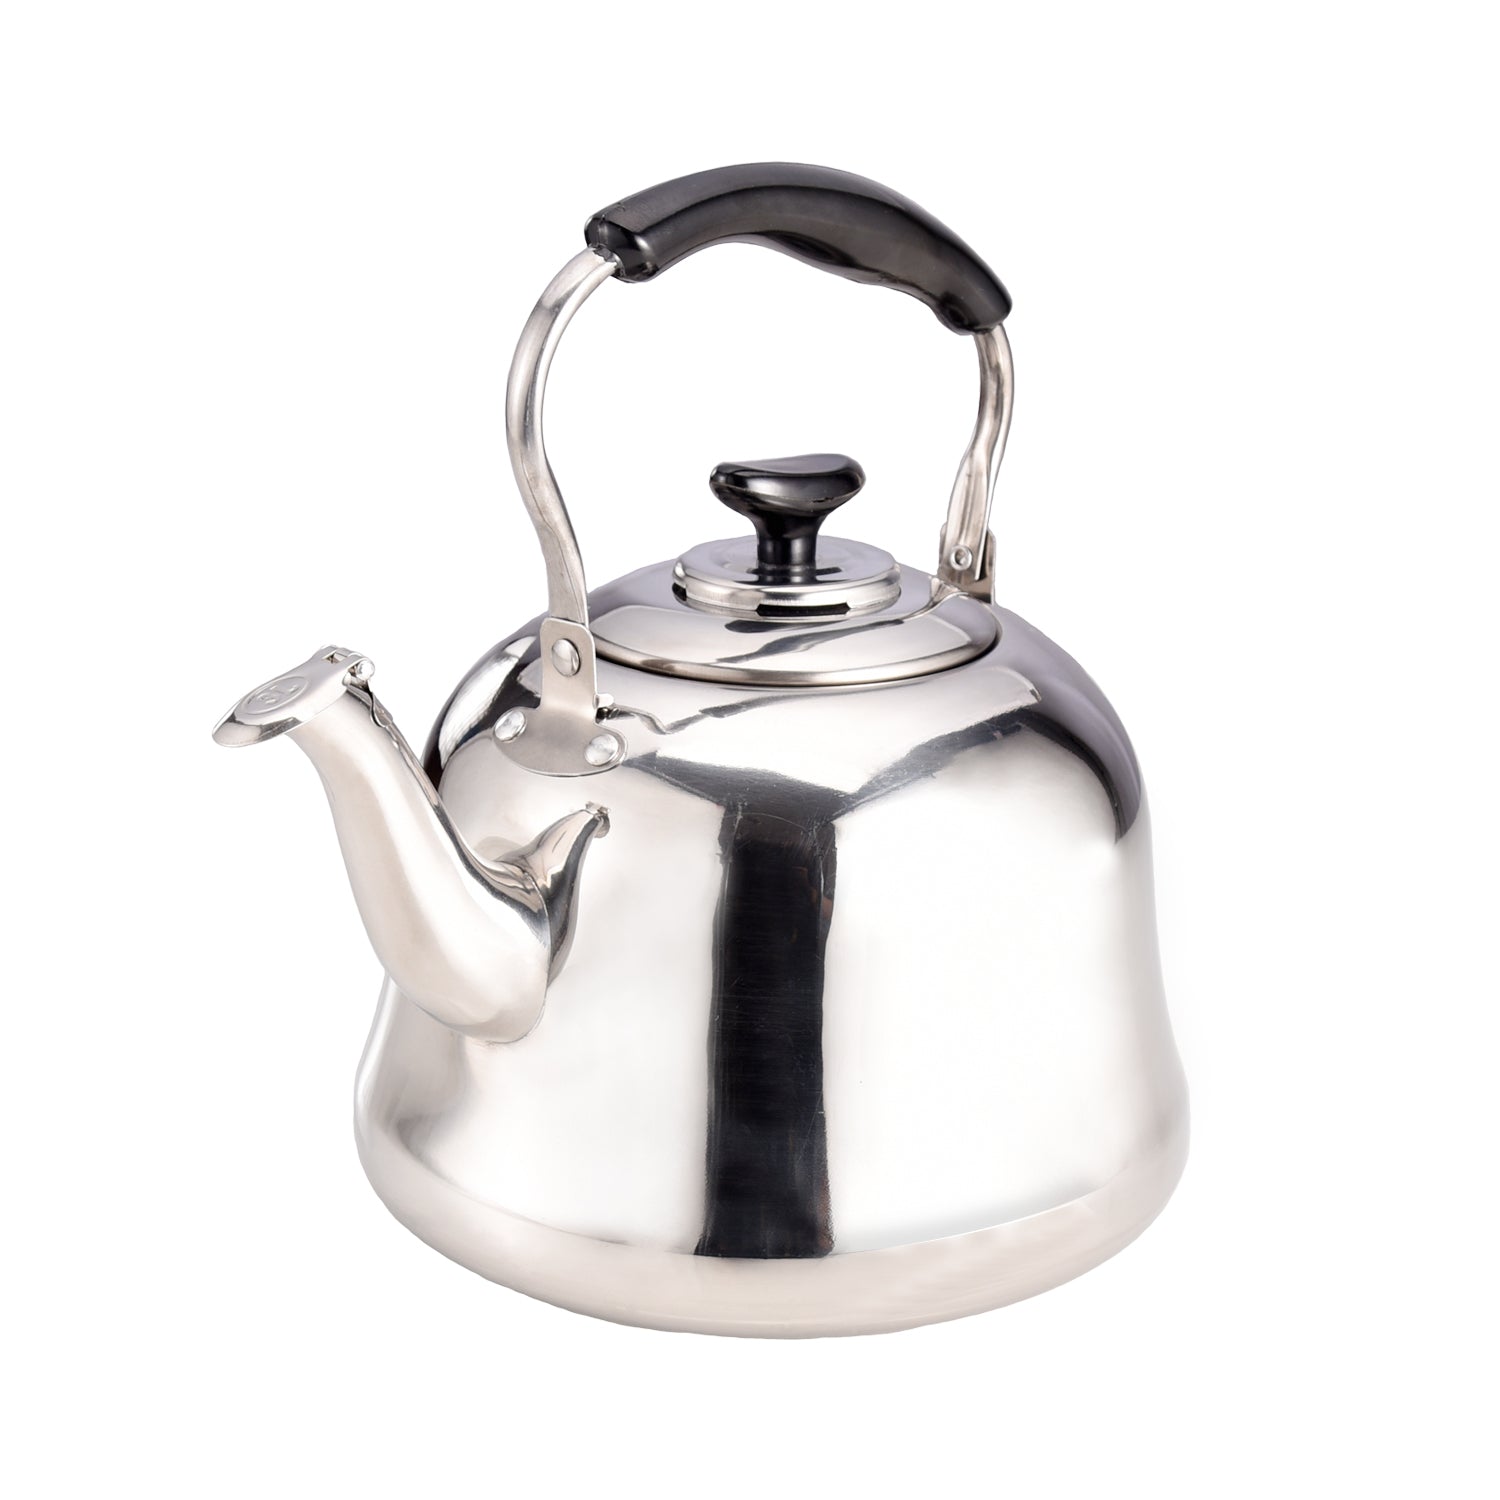 Photos - Electric Kettle 2.2L Classic Stainless Steel Stovetop Kettle RFU12532